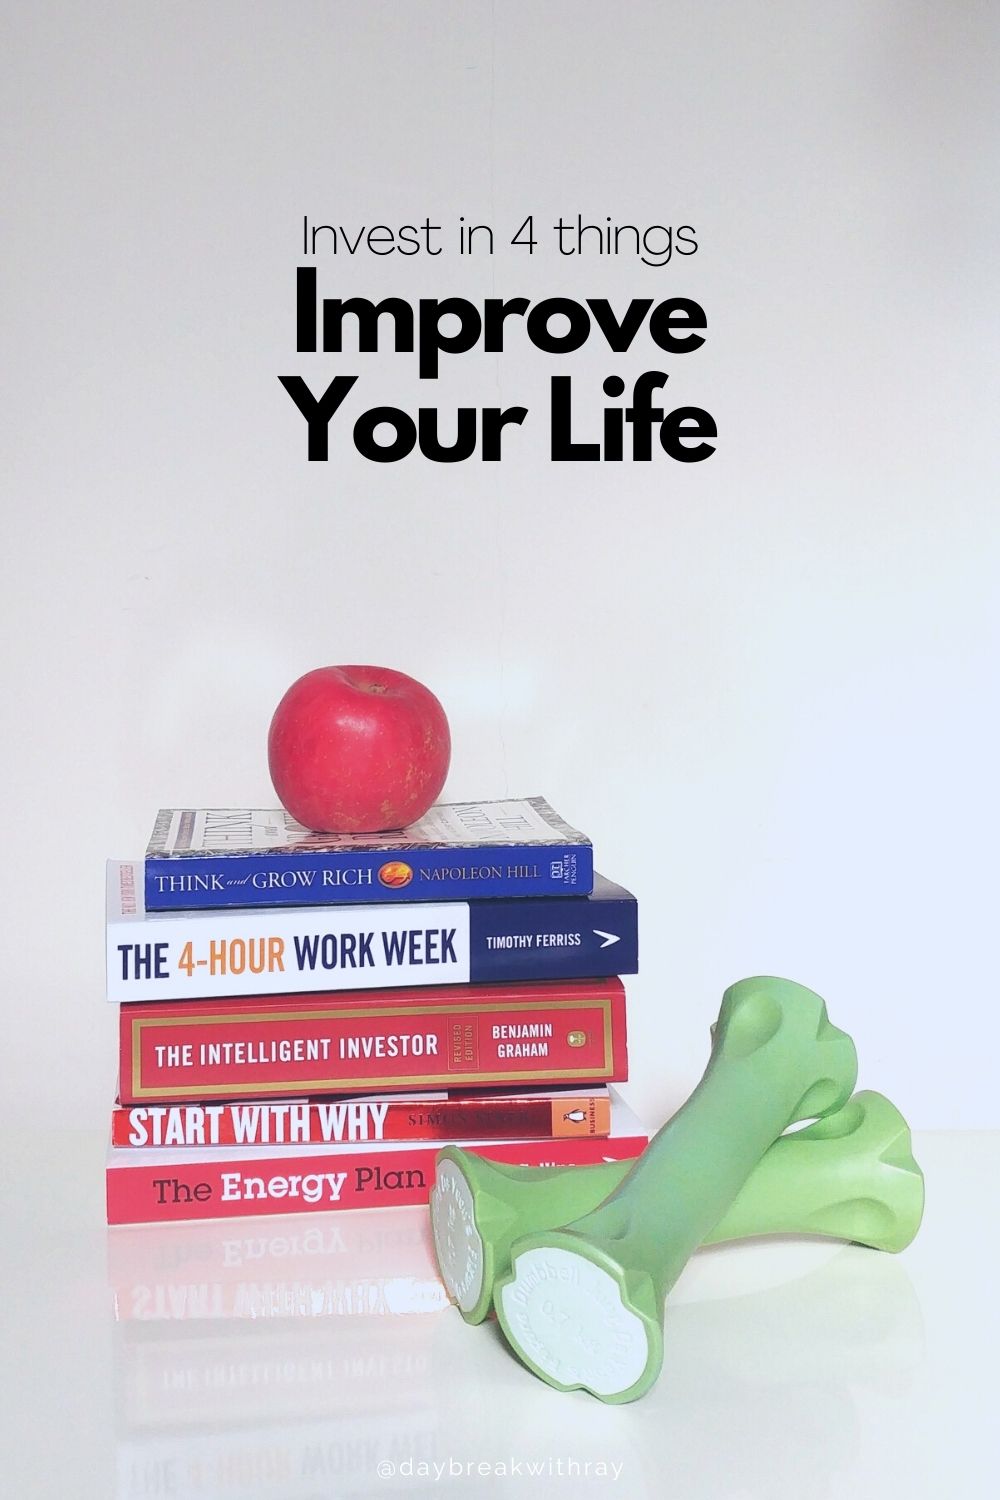 Invest in these 4 things to improve your life now